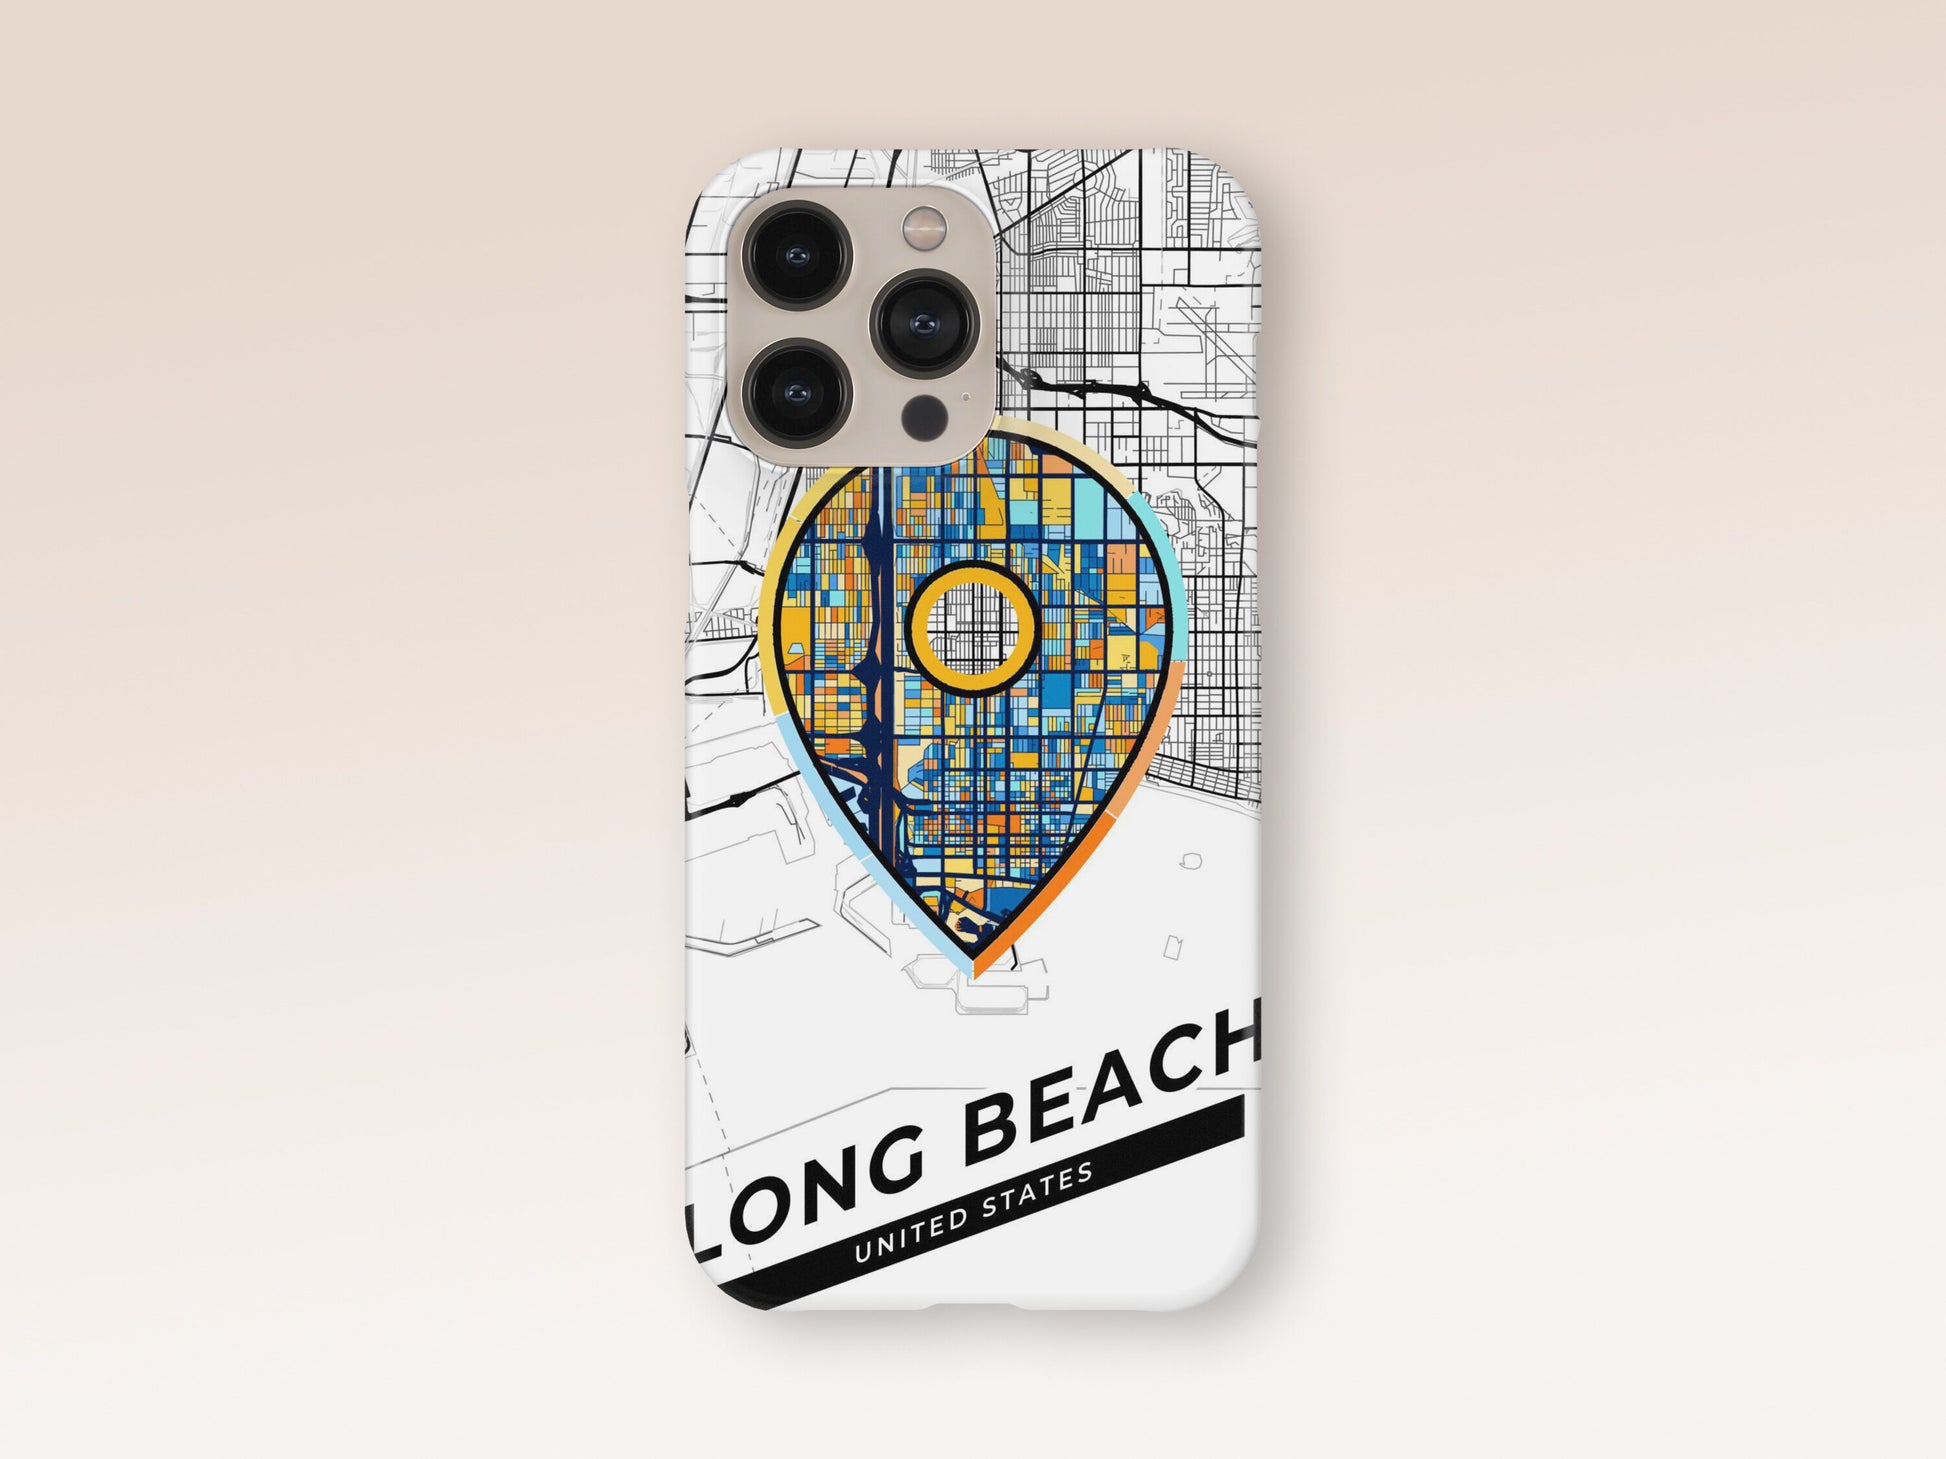 Long Beach California slim phone case with colorful icon. Birthday, wedding or housewarming gift. Couple match cases. 1